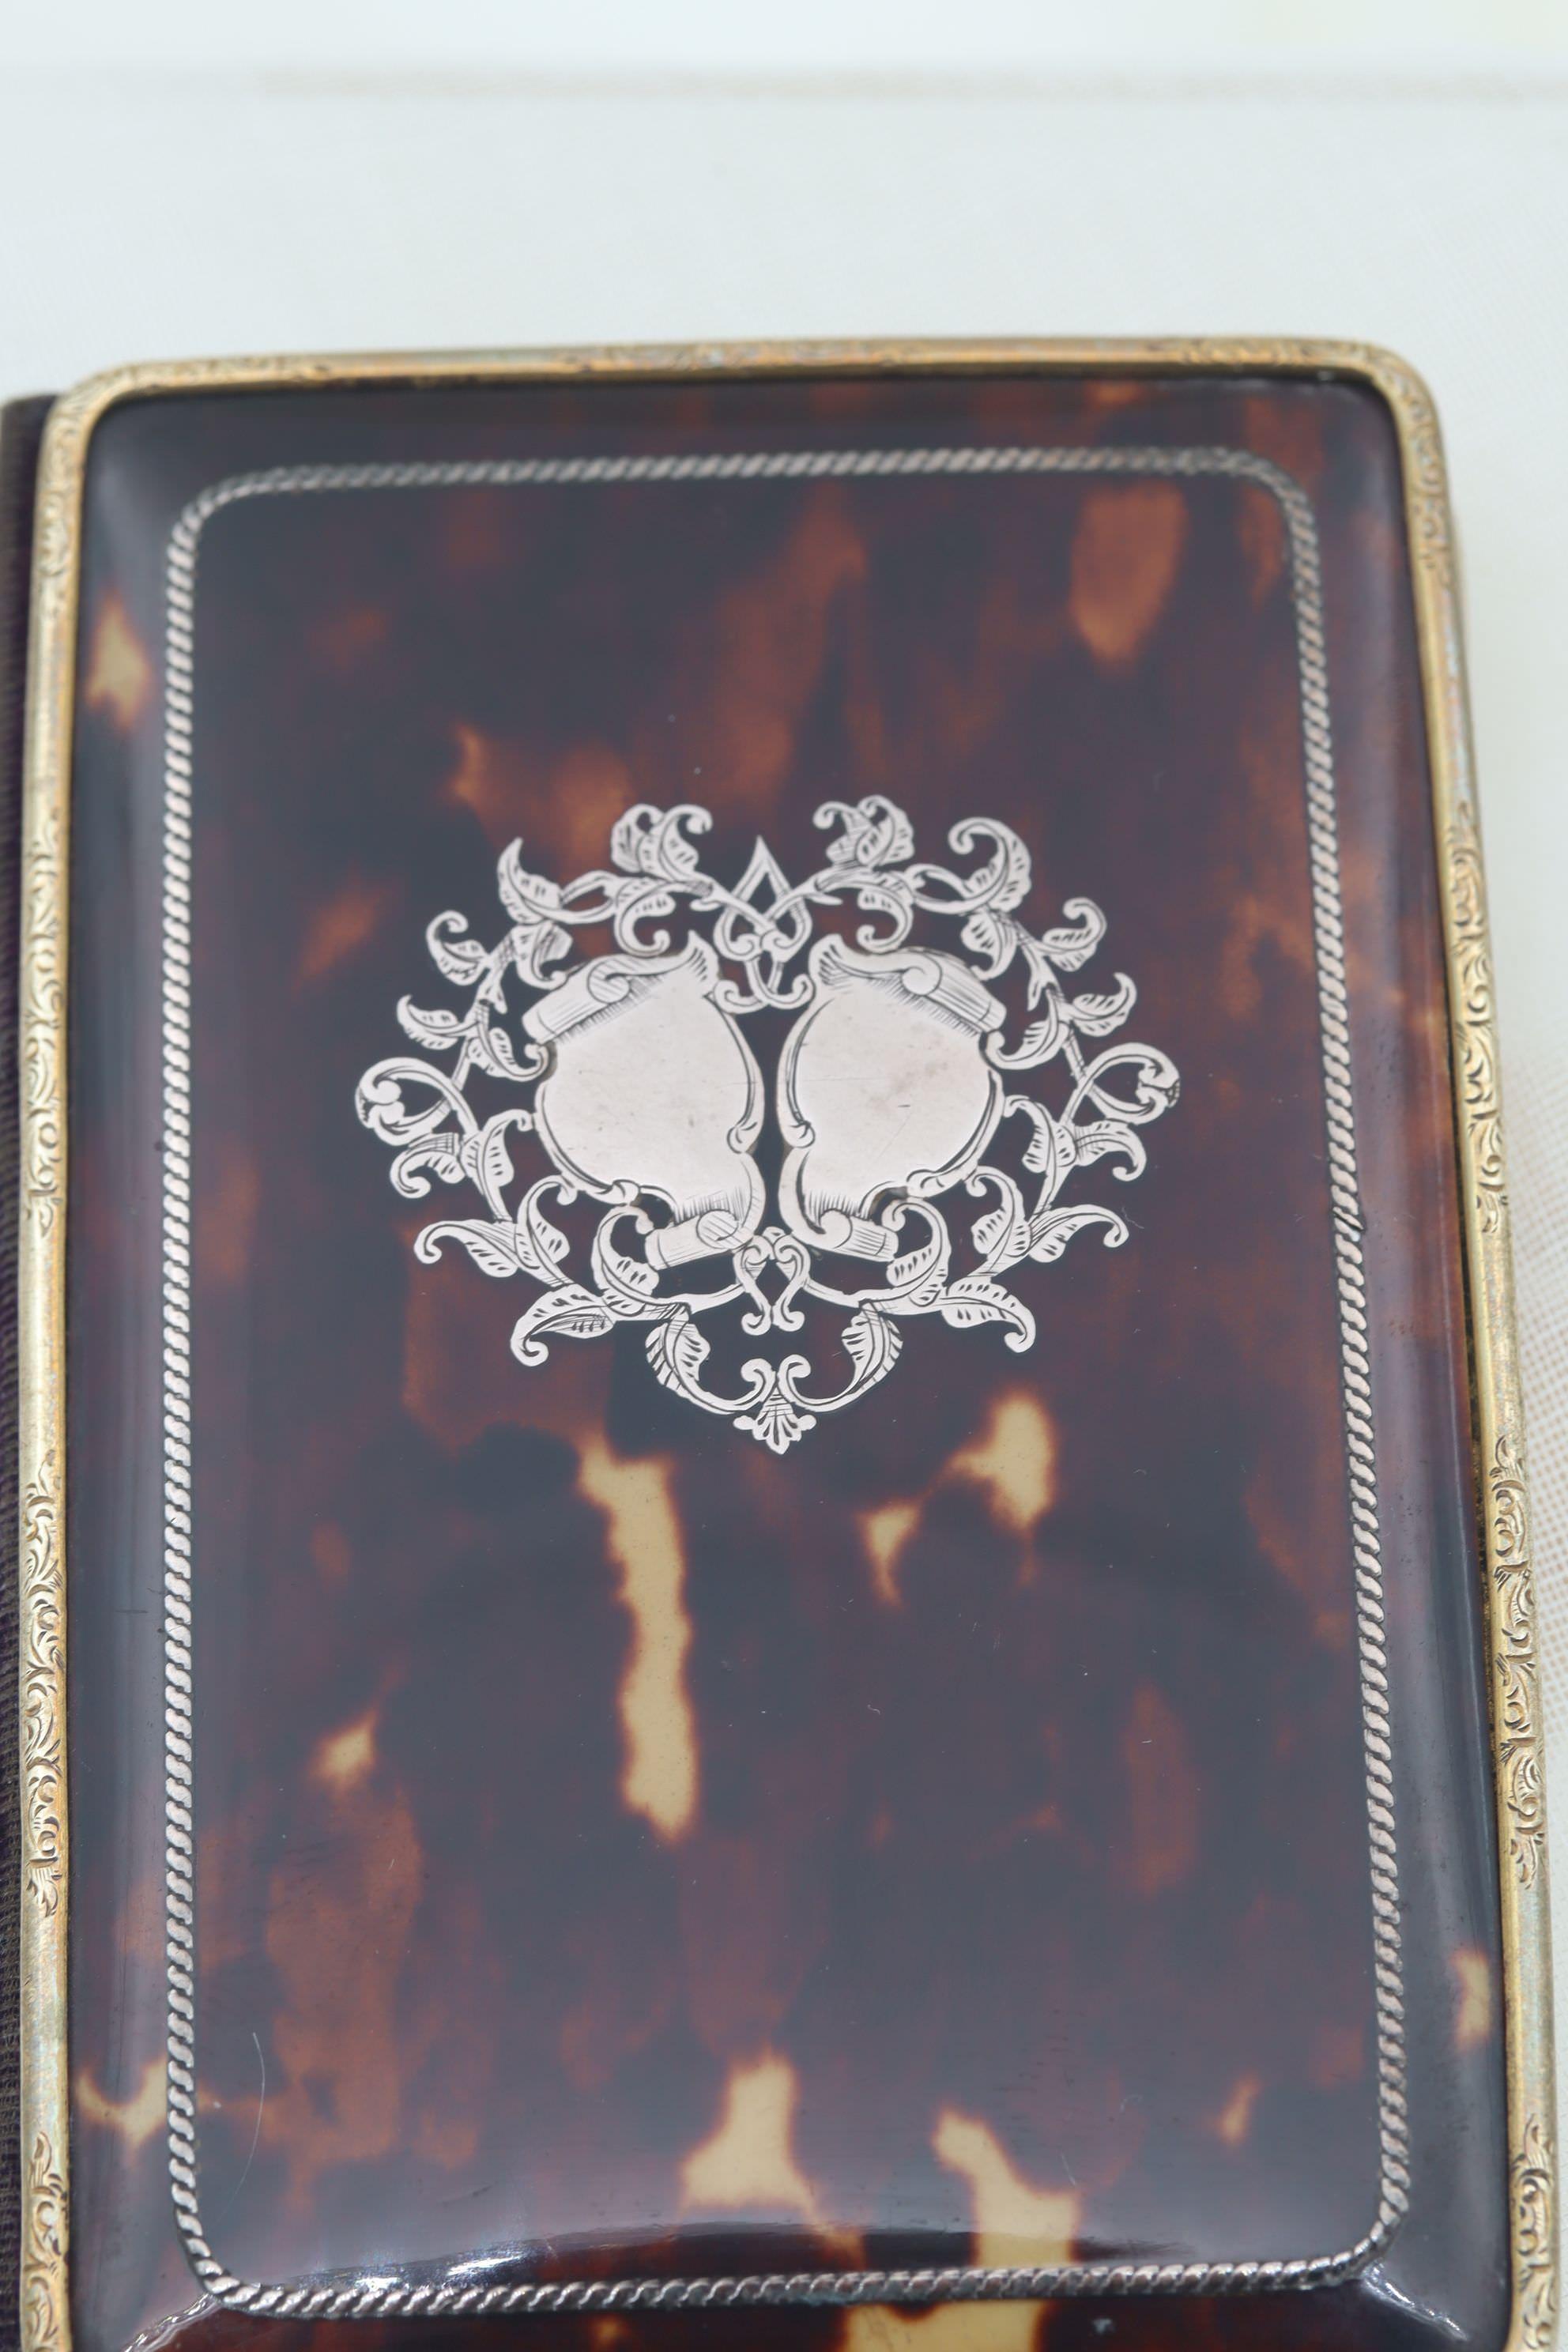 Tortoise Shell Ladies tortoiseshell aide memoire inlaid with silver and gold